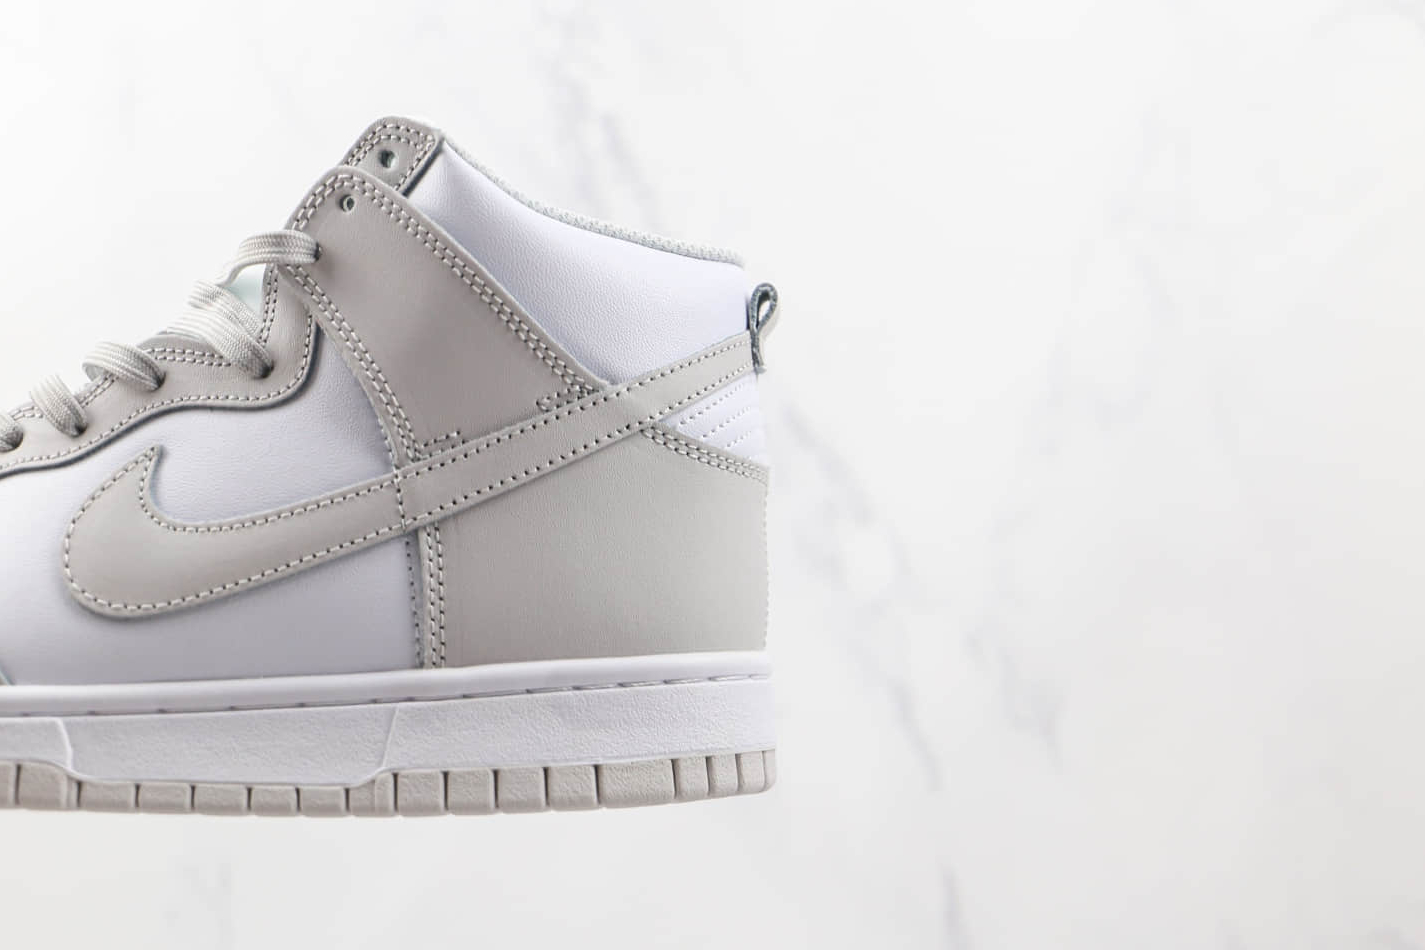 Nike Dunk High 'Vast Grey' DD1399-100: Classic Style meets Contemporary Design